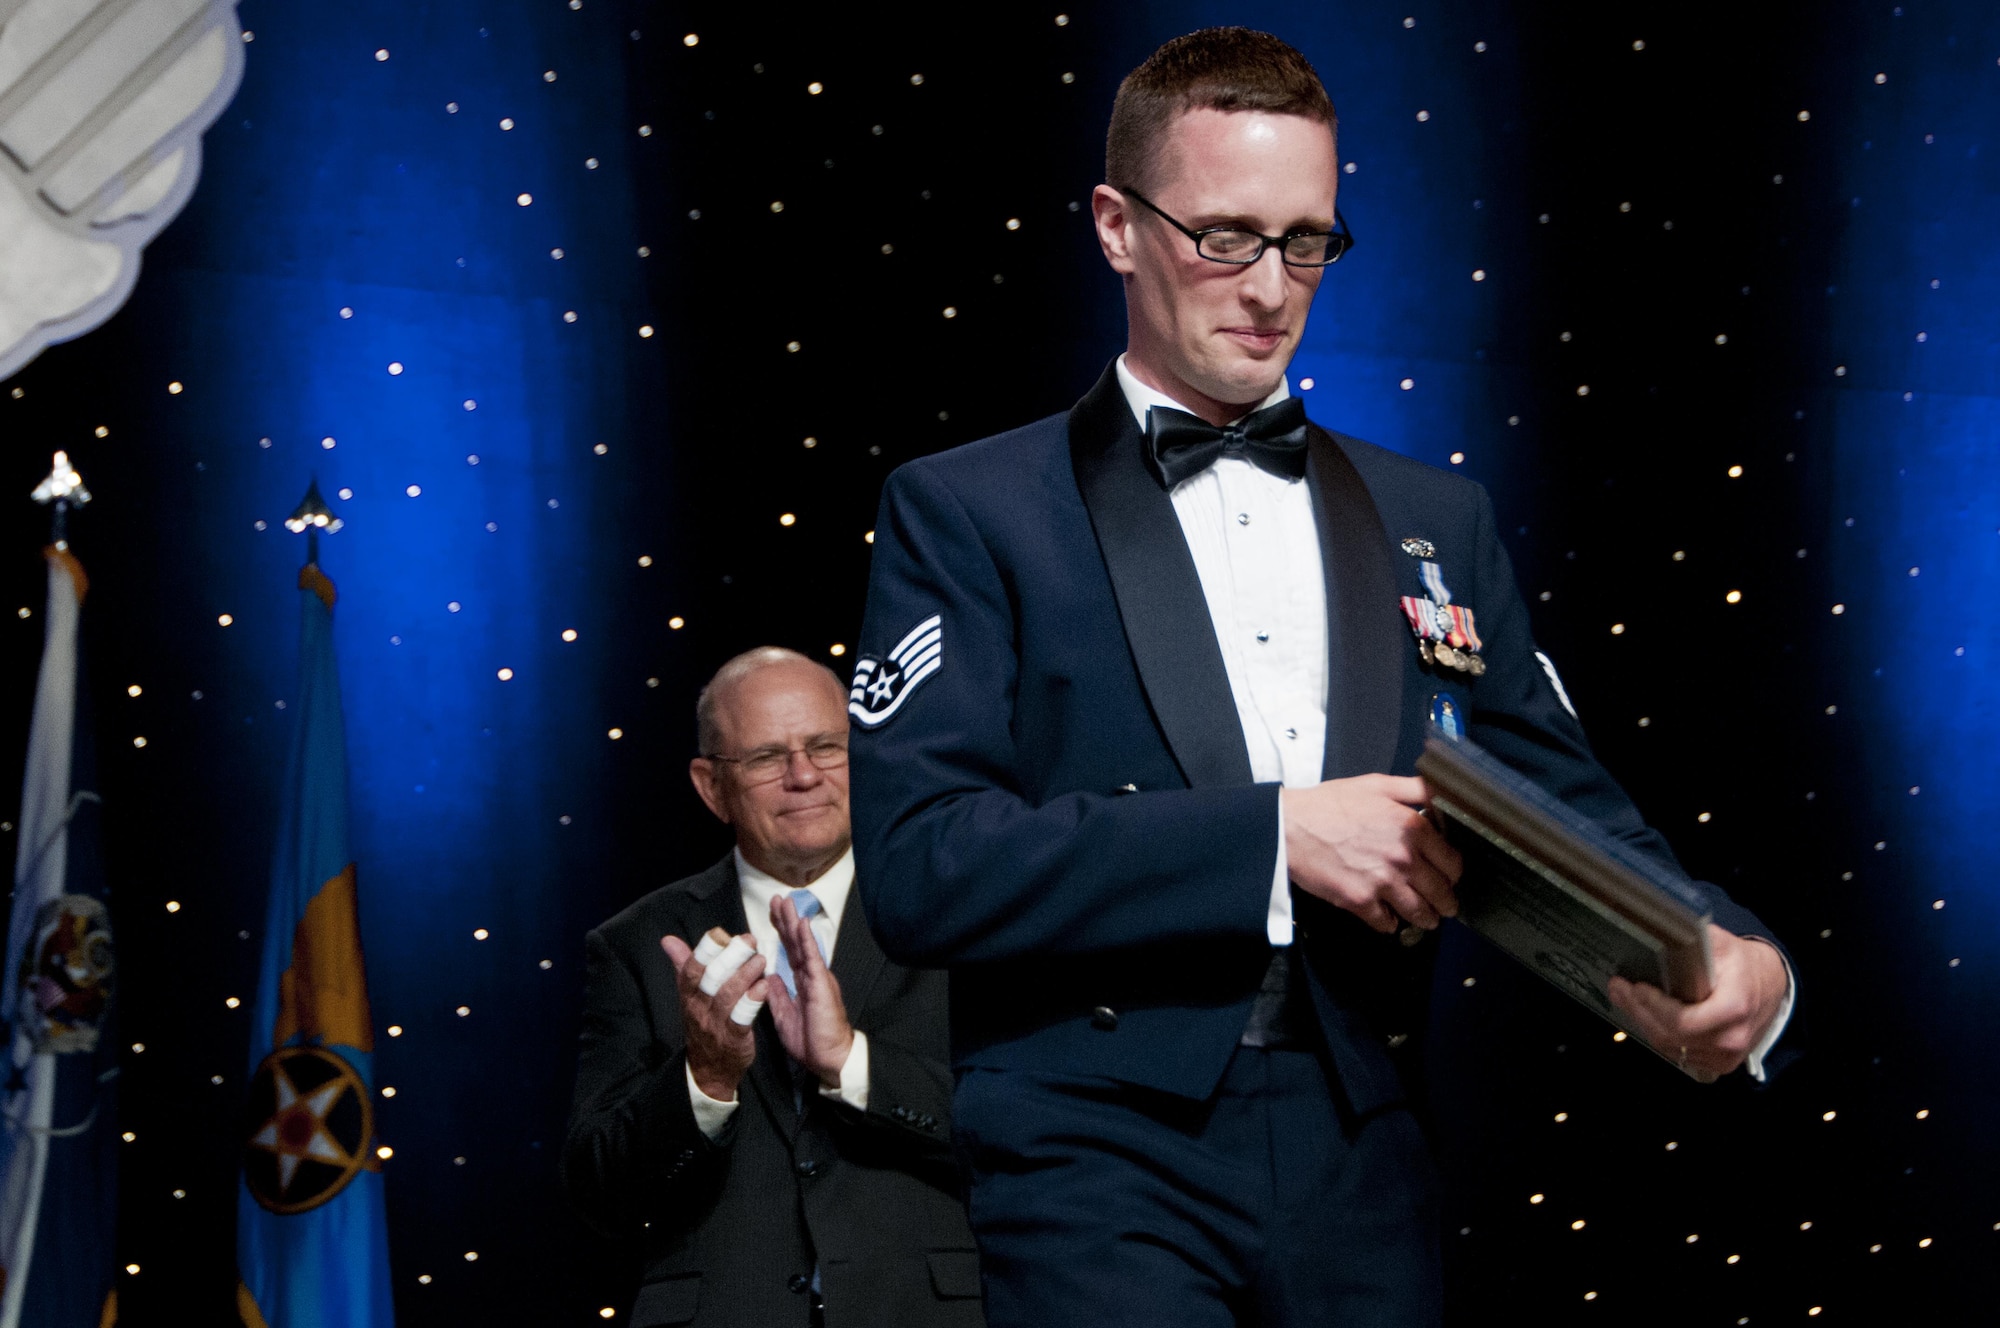 Staff Sgt. Aaron Tobler, one of the Air Force's 12 Outstanding Airmen of the Year, is recognized during the Air Force Association's Air, Space and Cyber Conference in Washington, D.C., Sept. 19, 2016.  Tobler is a geospatial intelligence analyst with the 50th Intelligence Squadron, Beale Air Force Base, California. The 50th IS is a geographically separated unit assigned to the 655th Intelligence Surveillance and Reconnaissance Group, Wright-Patterson Air Force Base, Ohio. 